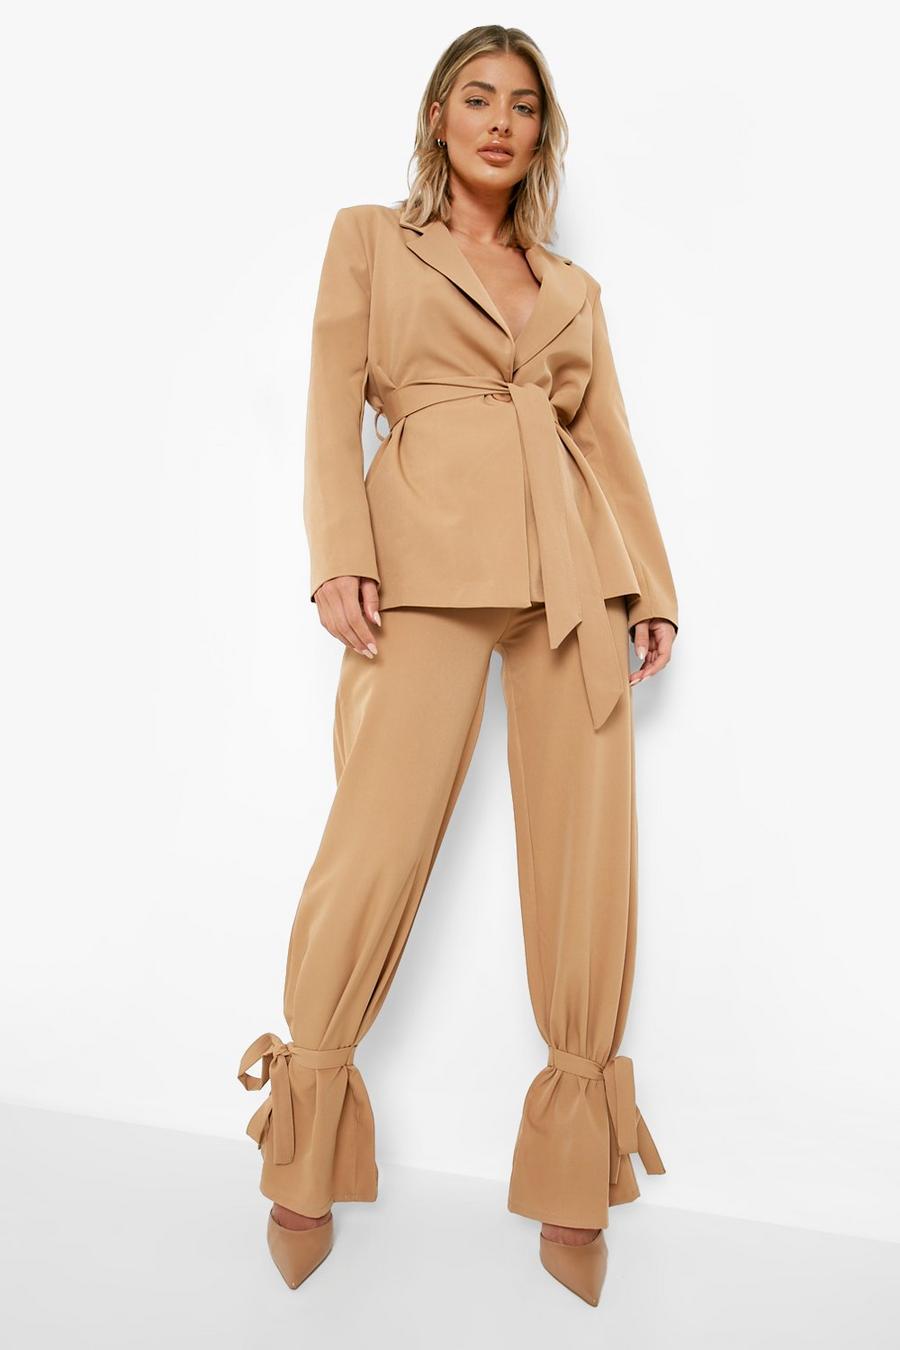 Caramel beige Tie Ankle Relaxed Fit Dress Pants